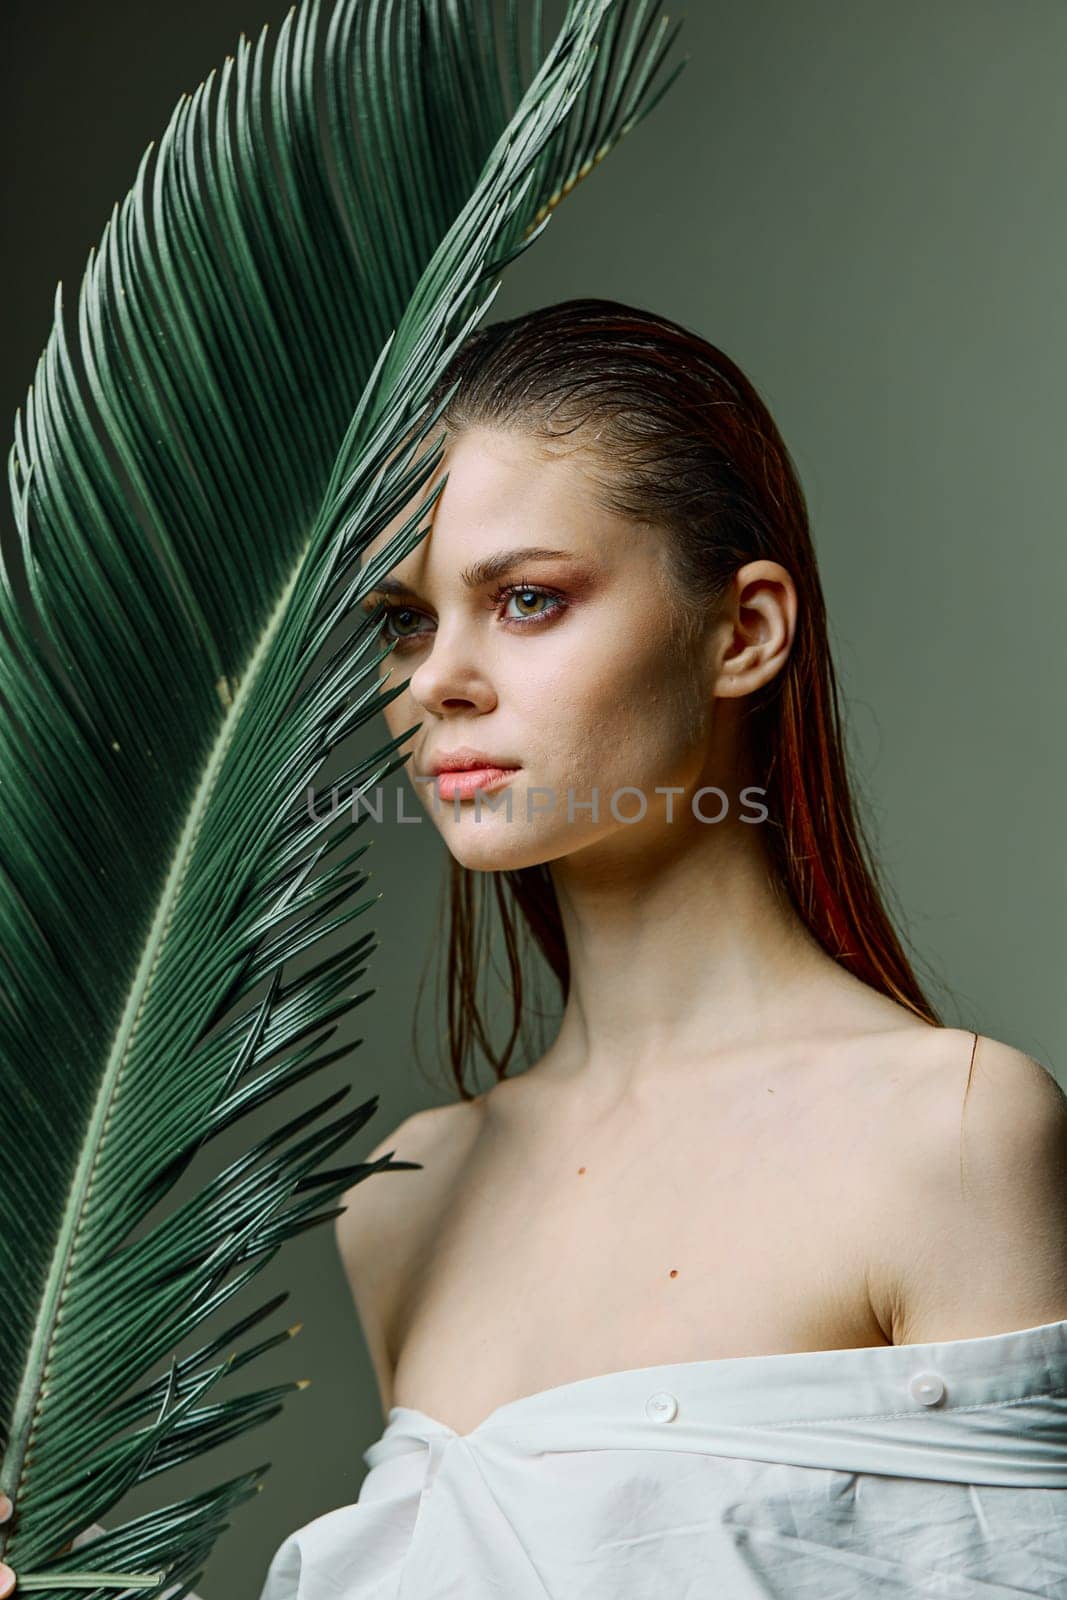 vertical photo portrait of an elegant woman with her hair slicked back, standing with a palm leaf holding it near her face. High quality photo